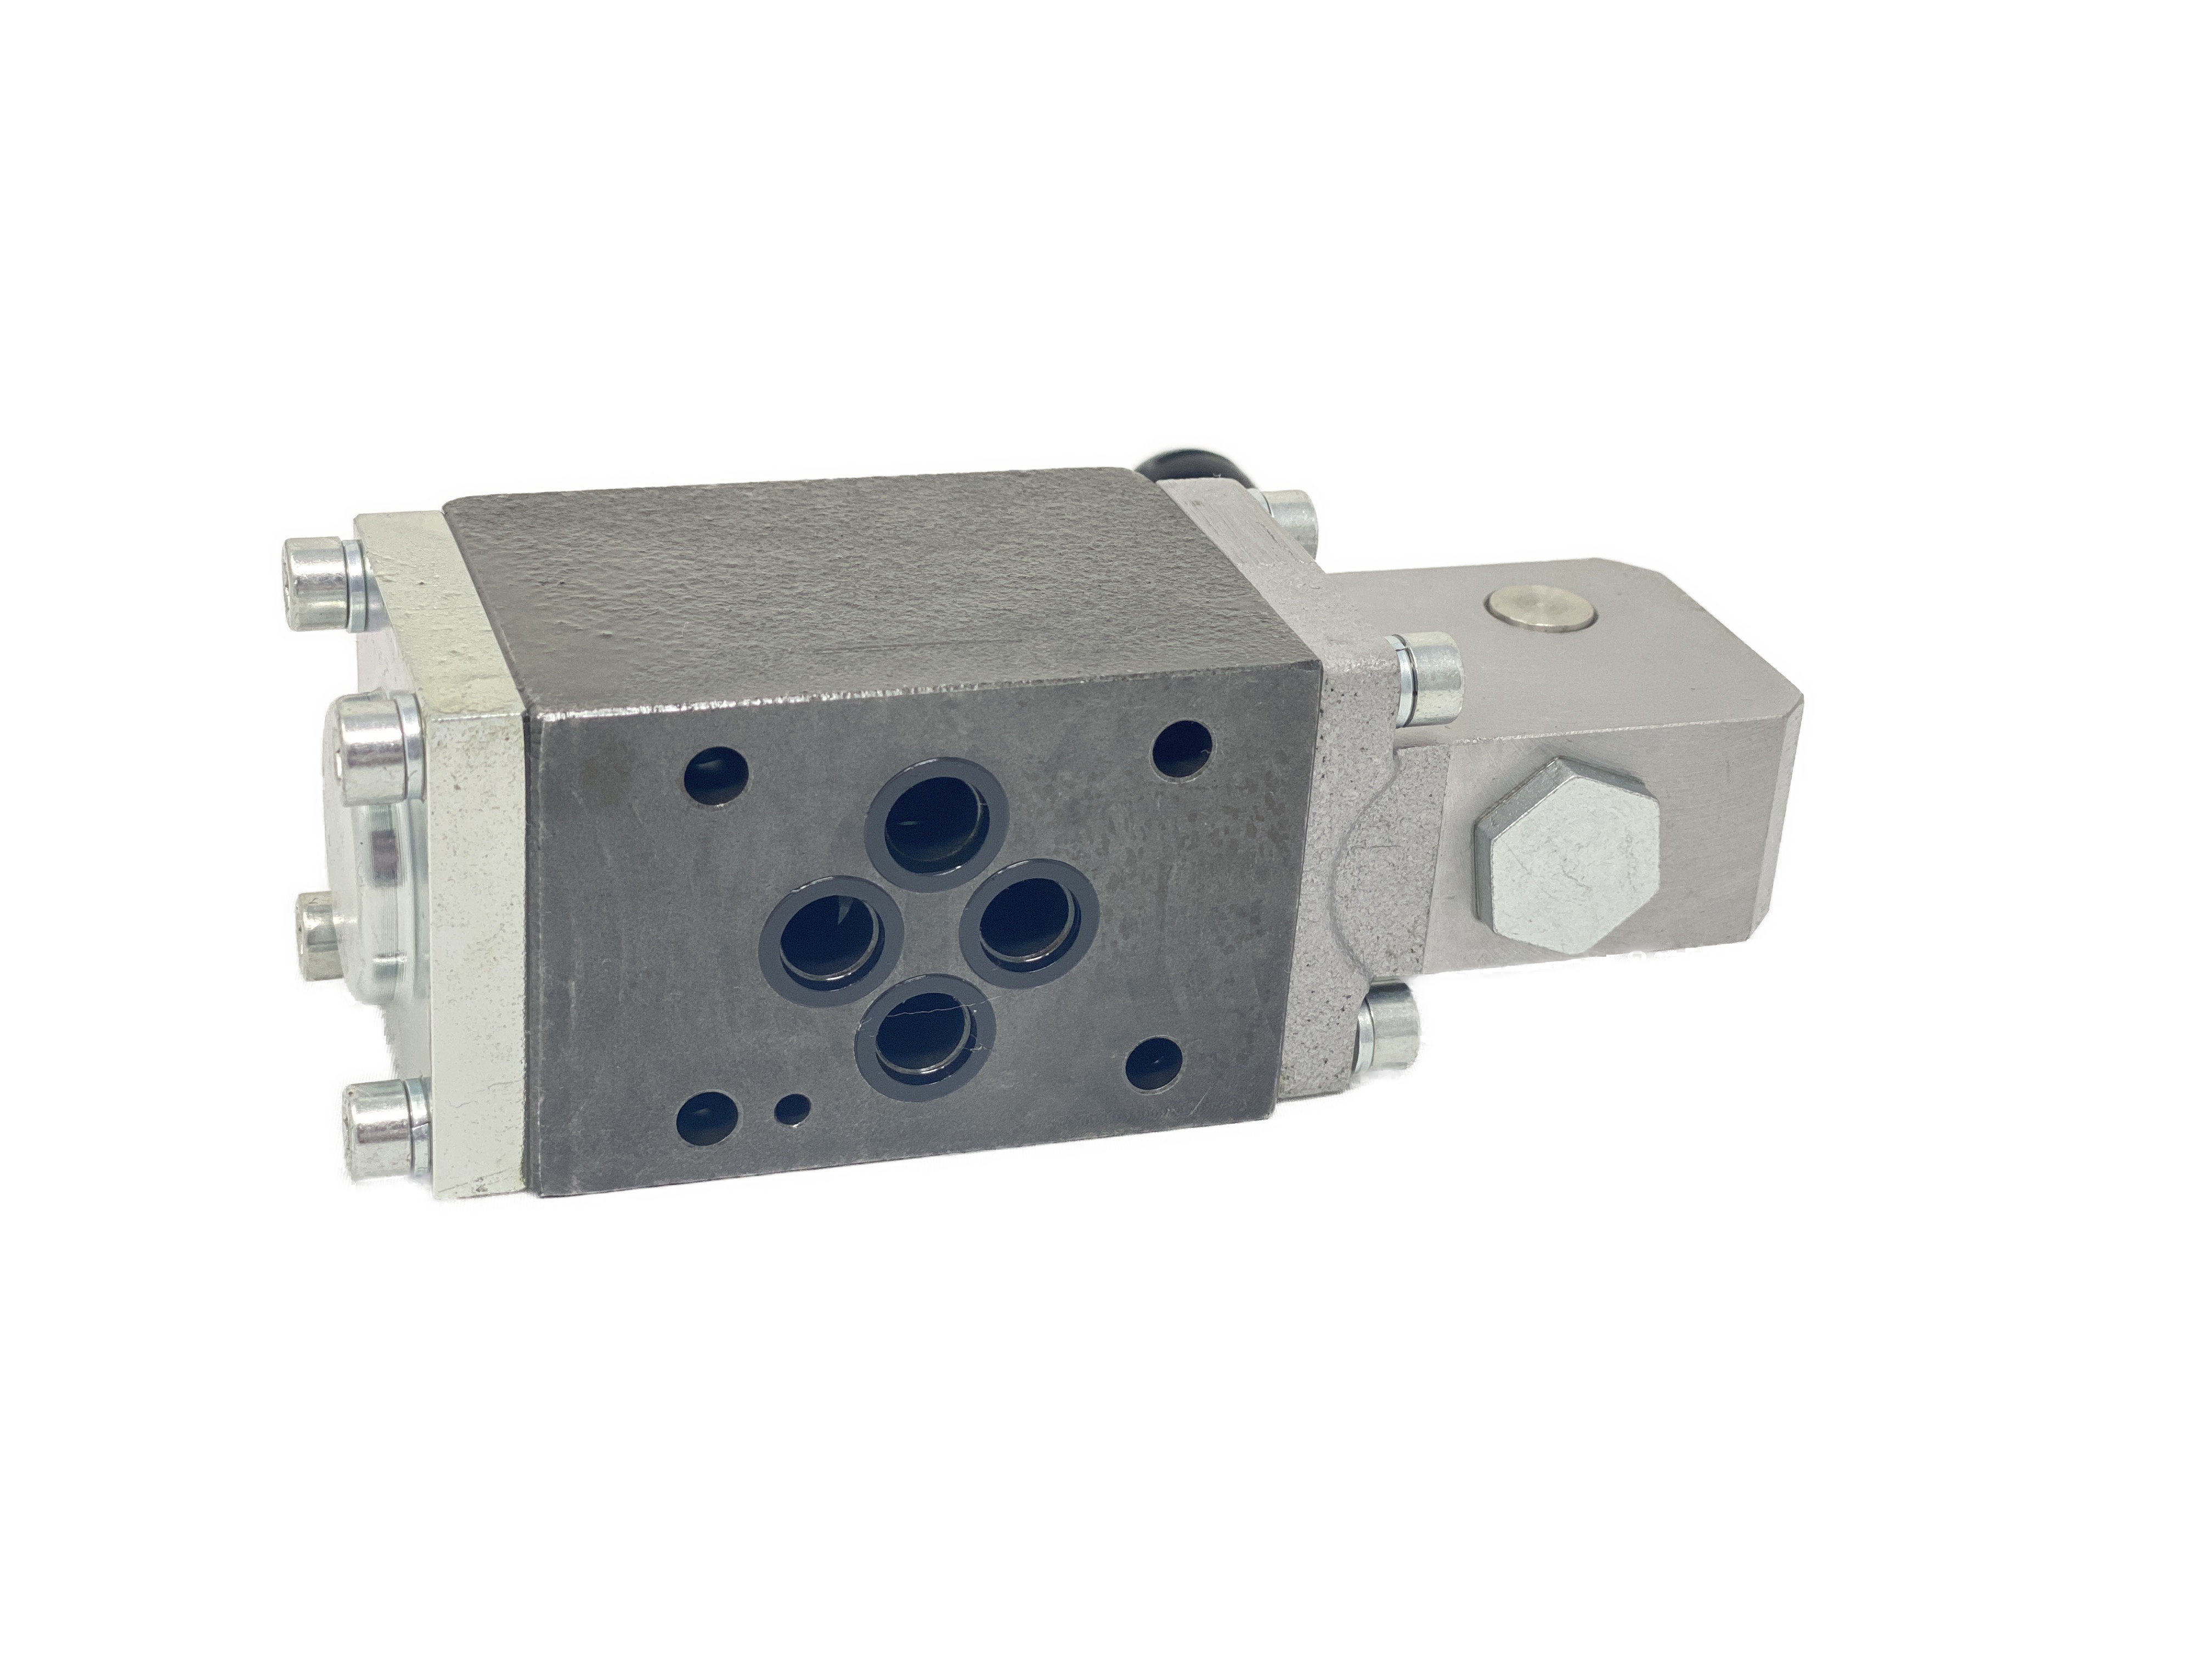 RPR3-062R11/A1 : Argo Hytos Directional Control Valve, Lever Operated, D03 (NG6), 21GPM, 5100psi, 2P4W, Spring Return, Tandem Spool in Neutral